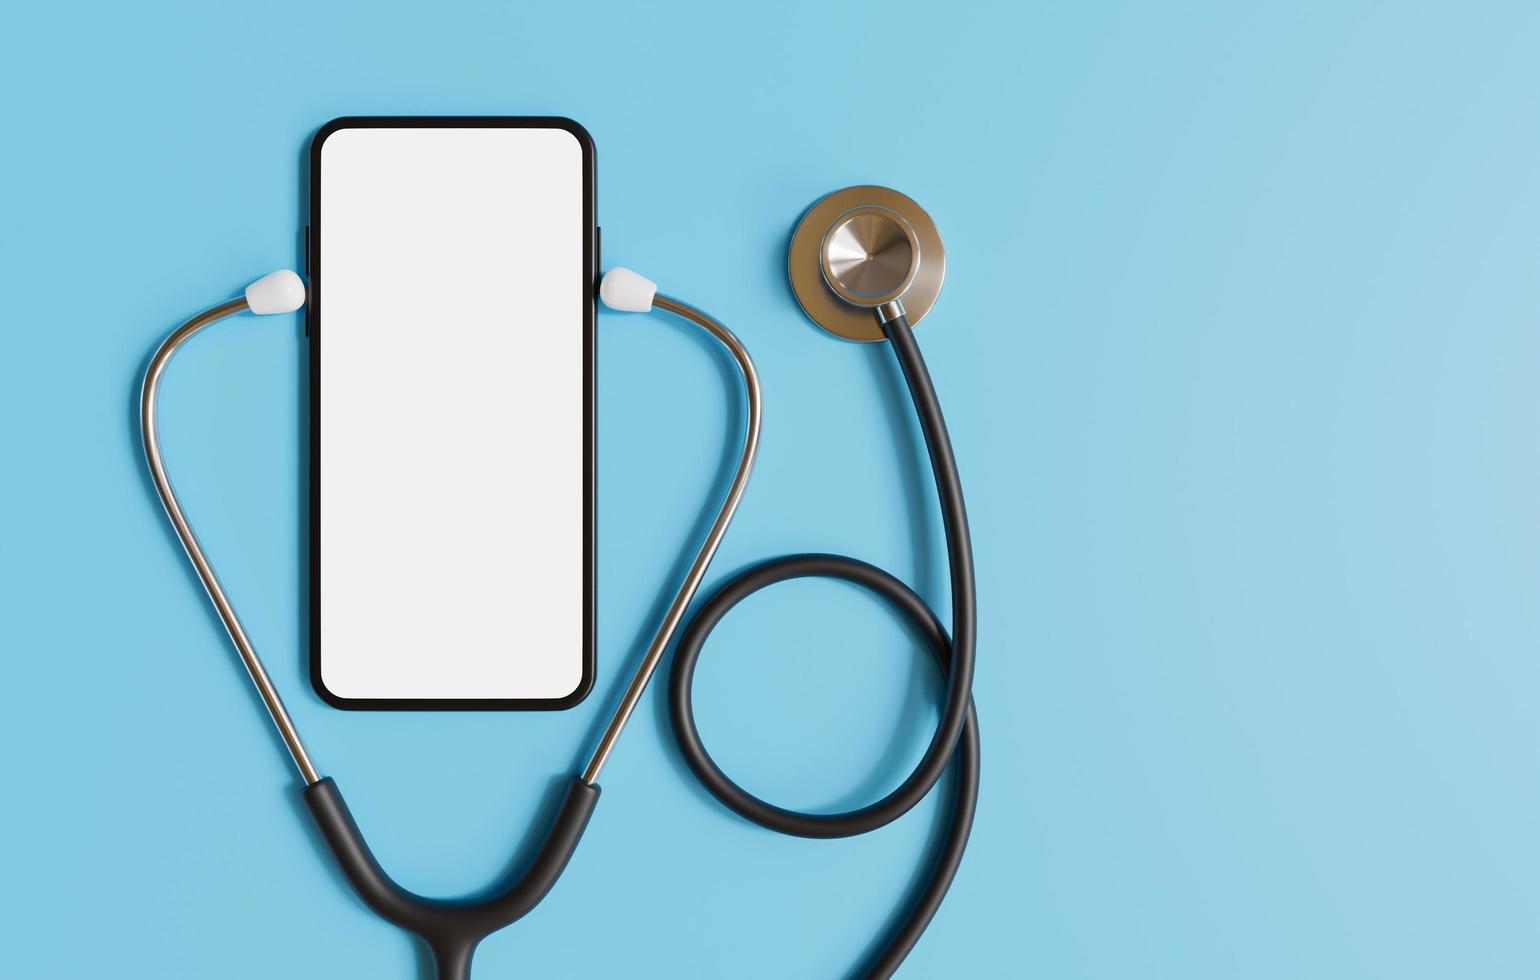 Stethoscope and smartphone on blue background, app health smartphone mockup, get an online consultation from doctor by smartphone, doctor online consultation concept. 3D rendering. photo